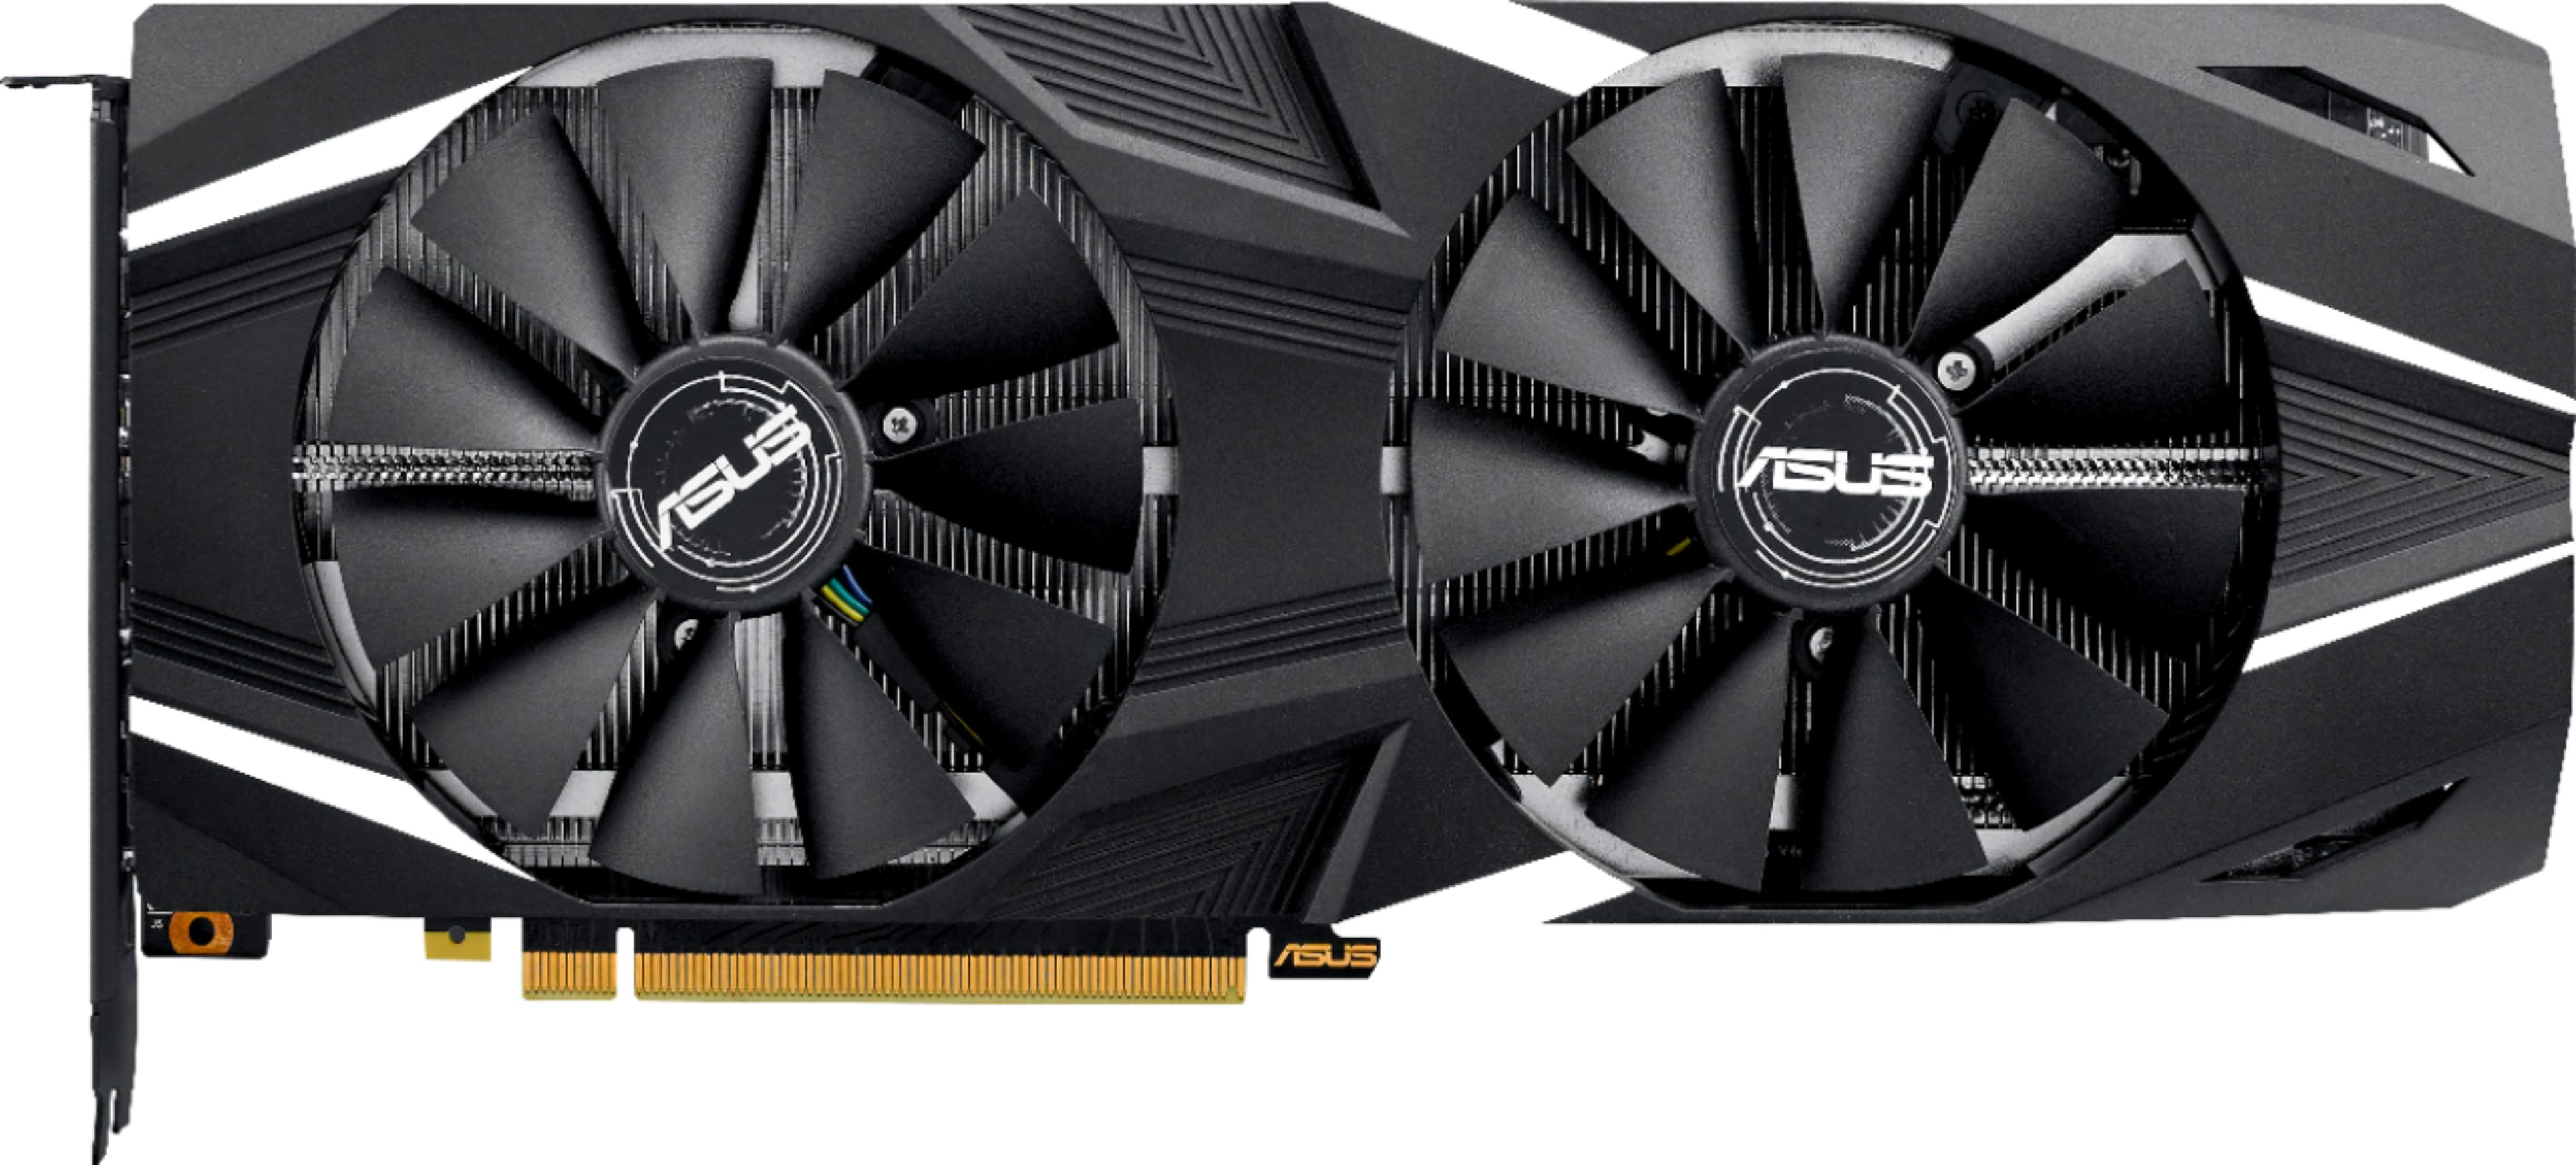 Best Buy: ASUS GeForce RTX 2080 OC Edition 8GB GDDR6 Express 3.0 Graphics Black/White DUAL-RTX2080-O8G